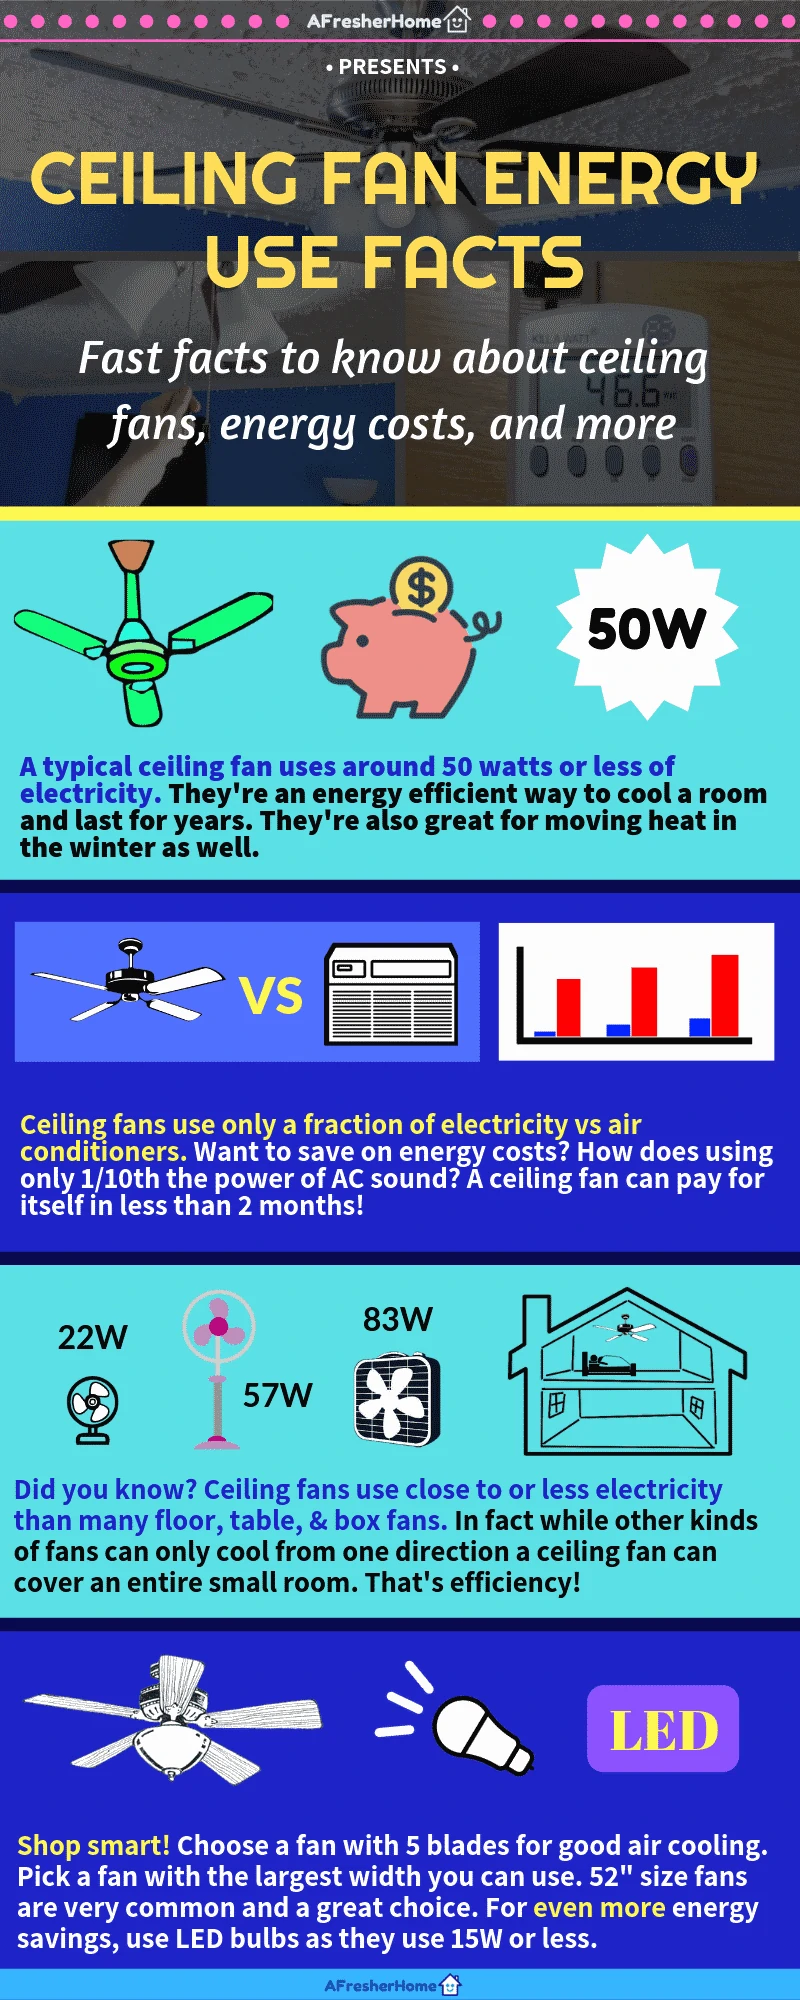 Infographic for ceiling fan energy use facts and information